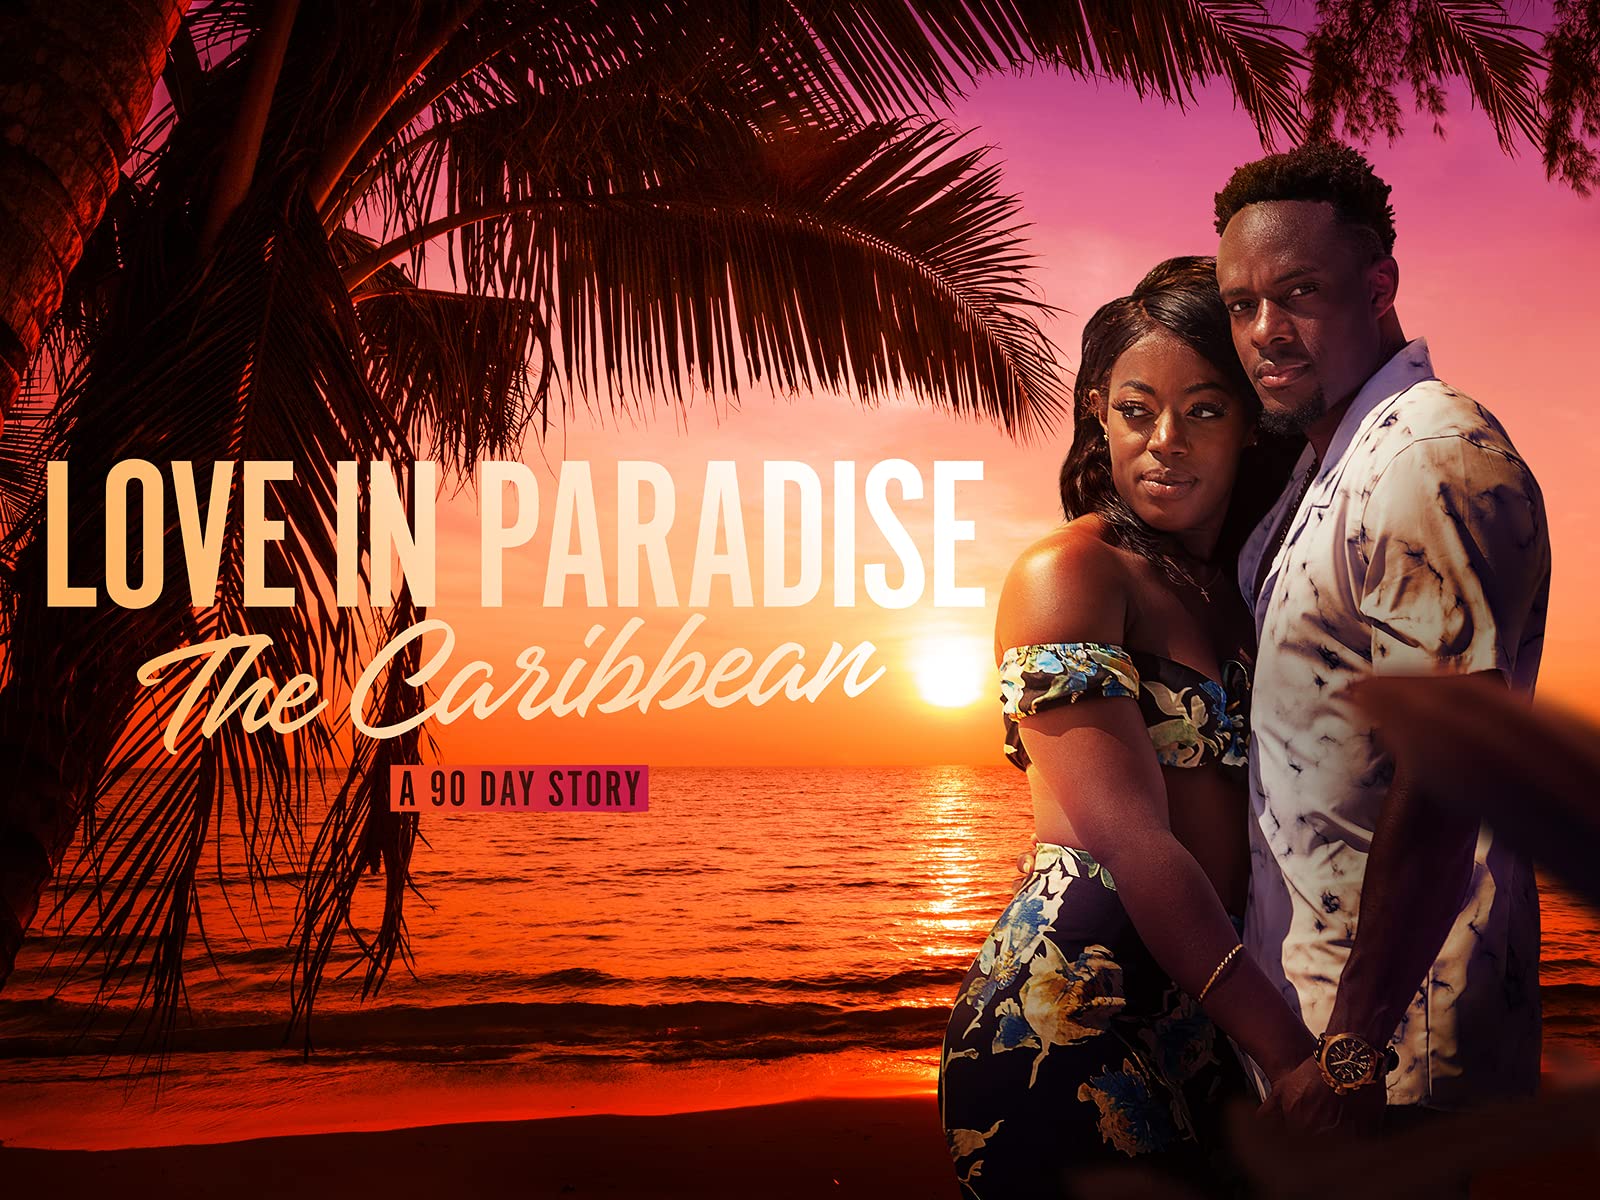 Watch Love in Paradise: The Caribbean, A 90 Day Story - Season 2